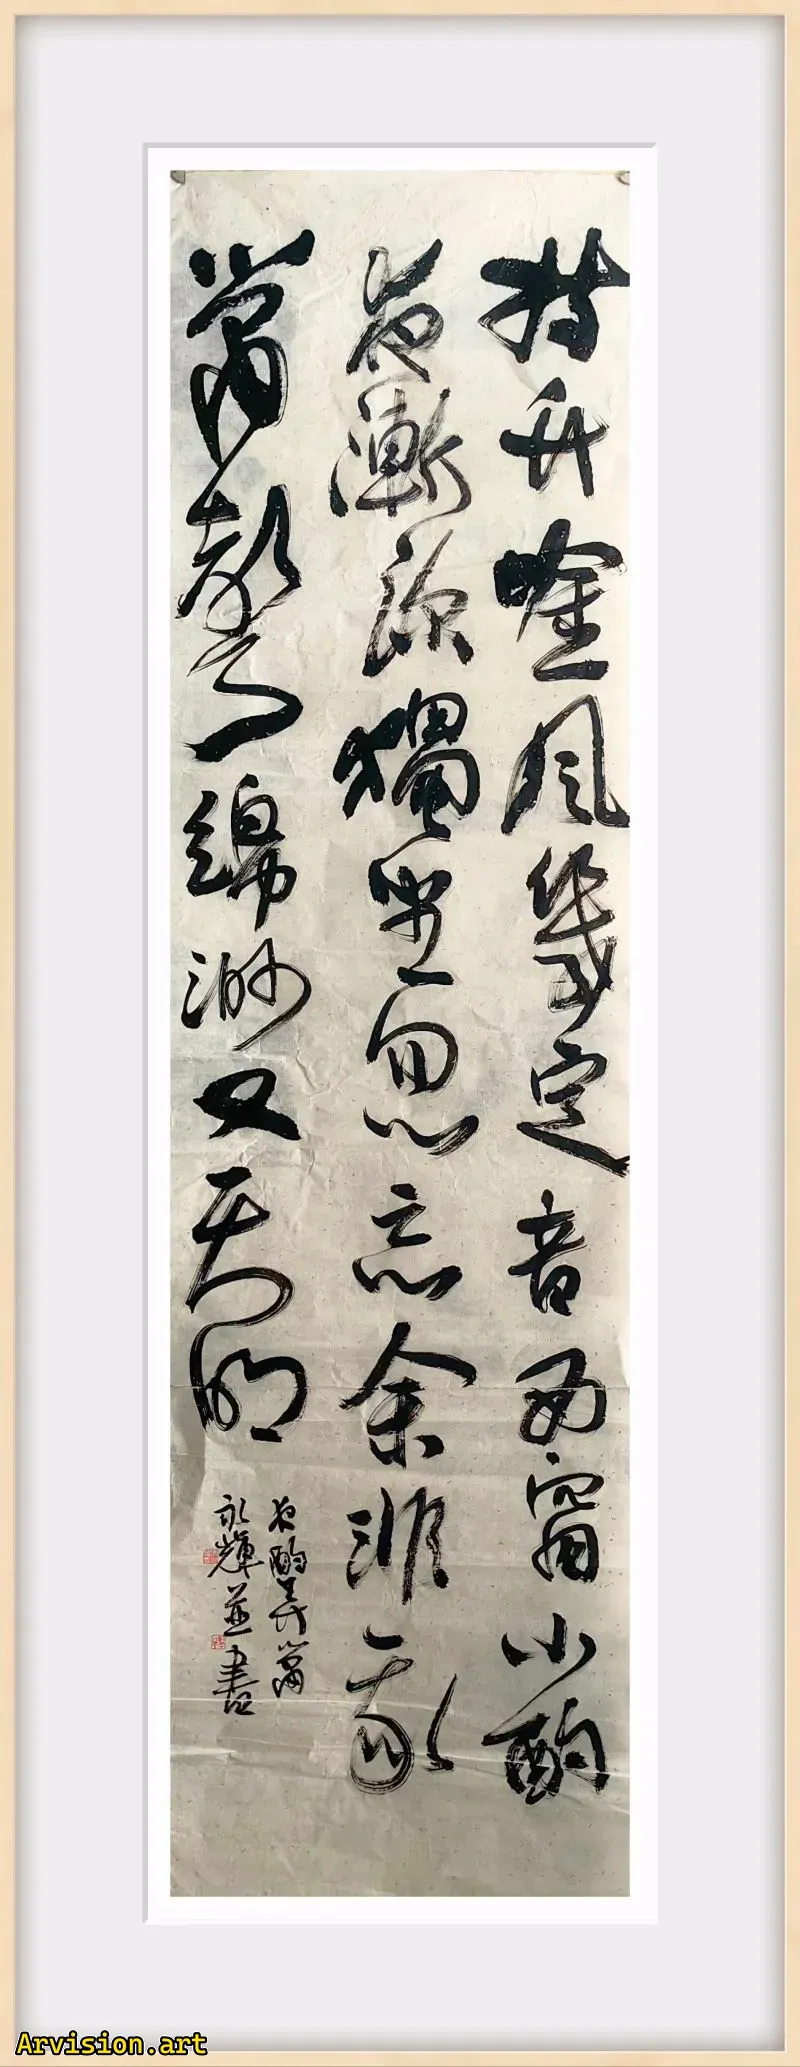 Song Yonghui's Calligraphy Works with Bamboo Whispering Wind and Several Fixed Tones